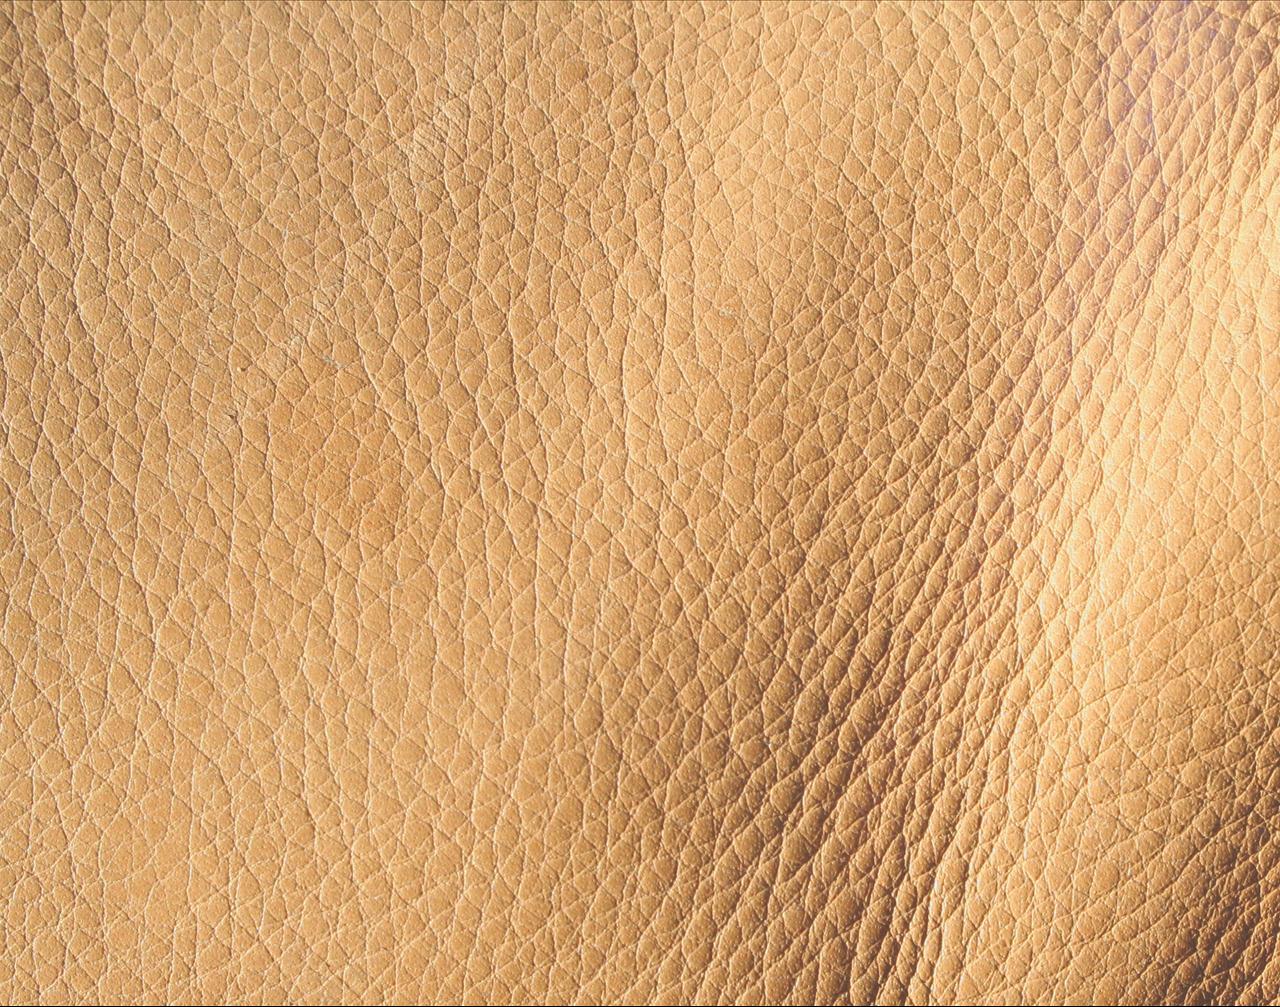 Warm Leather Backgrounds